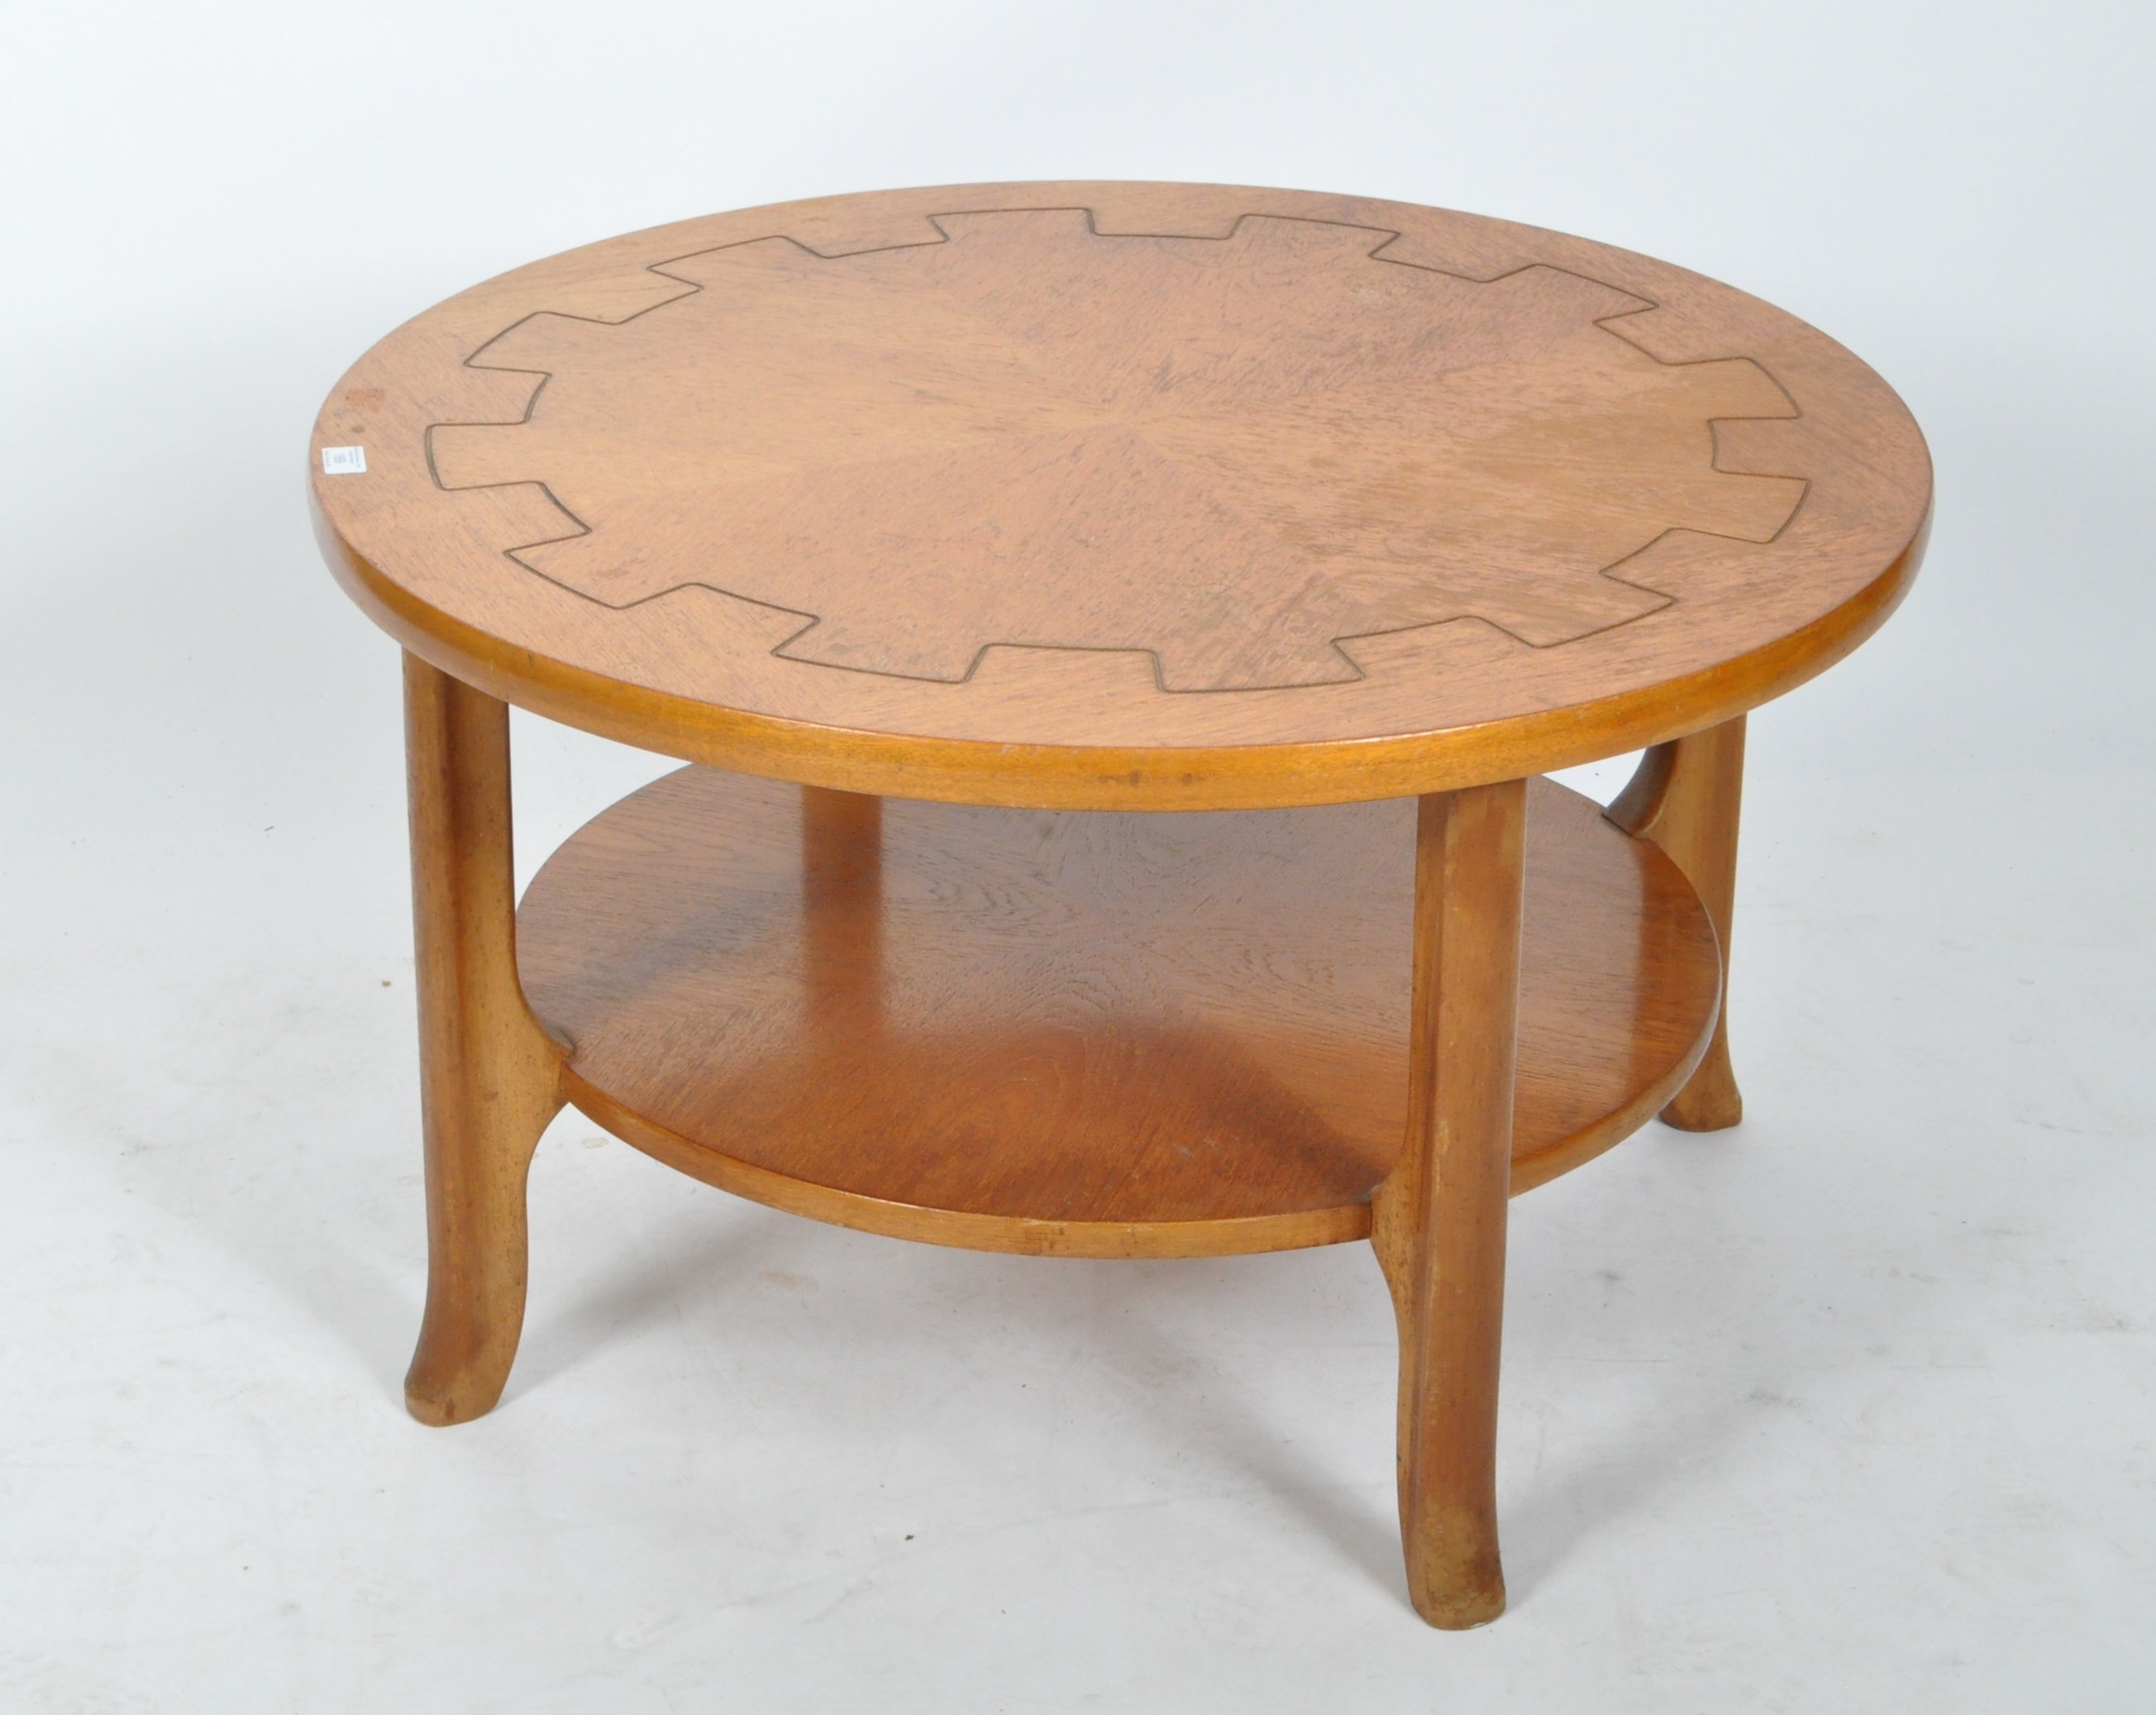 NATHAN MID CENTURY TEAK WOOD TWO TIER COFFEE TABLE - Image 2 of 5